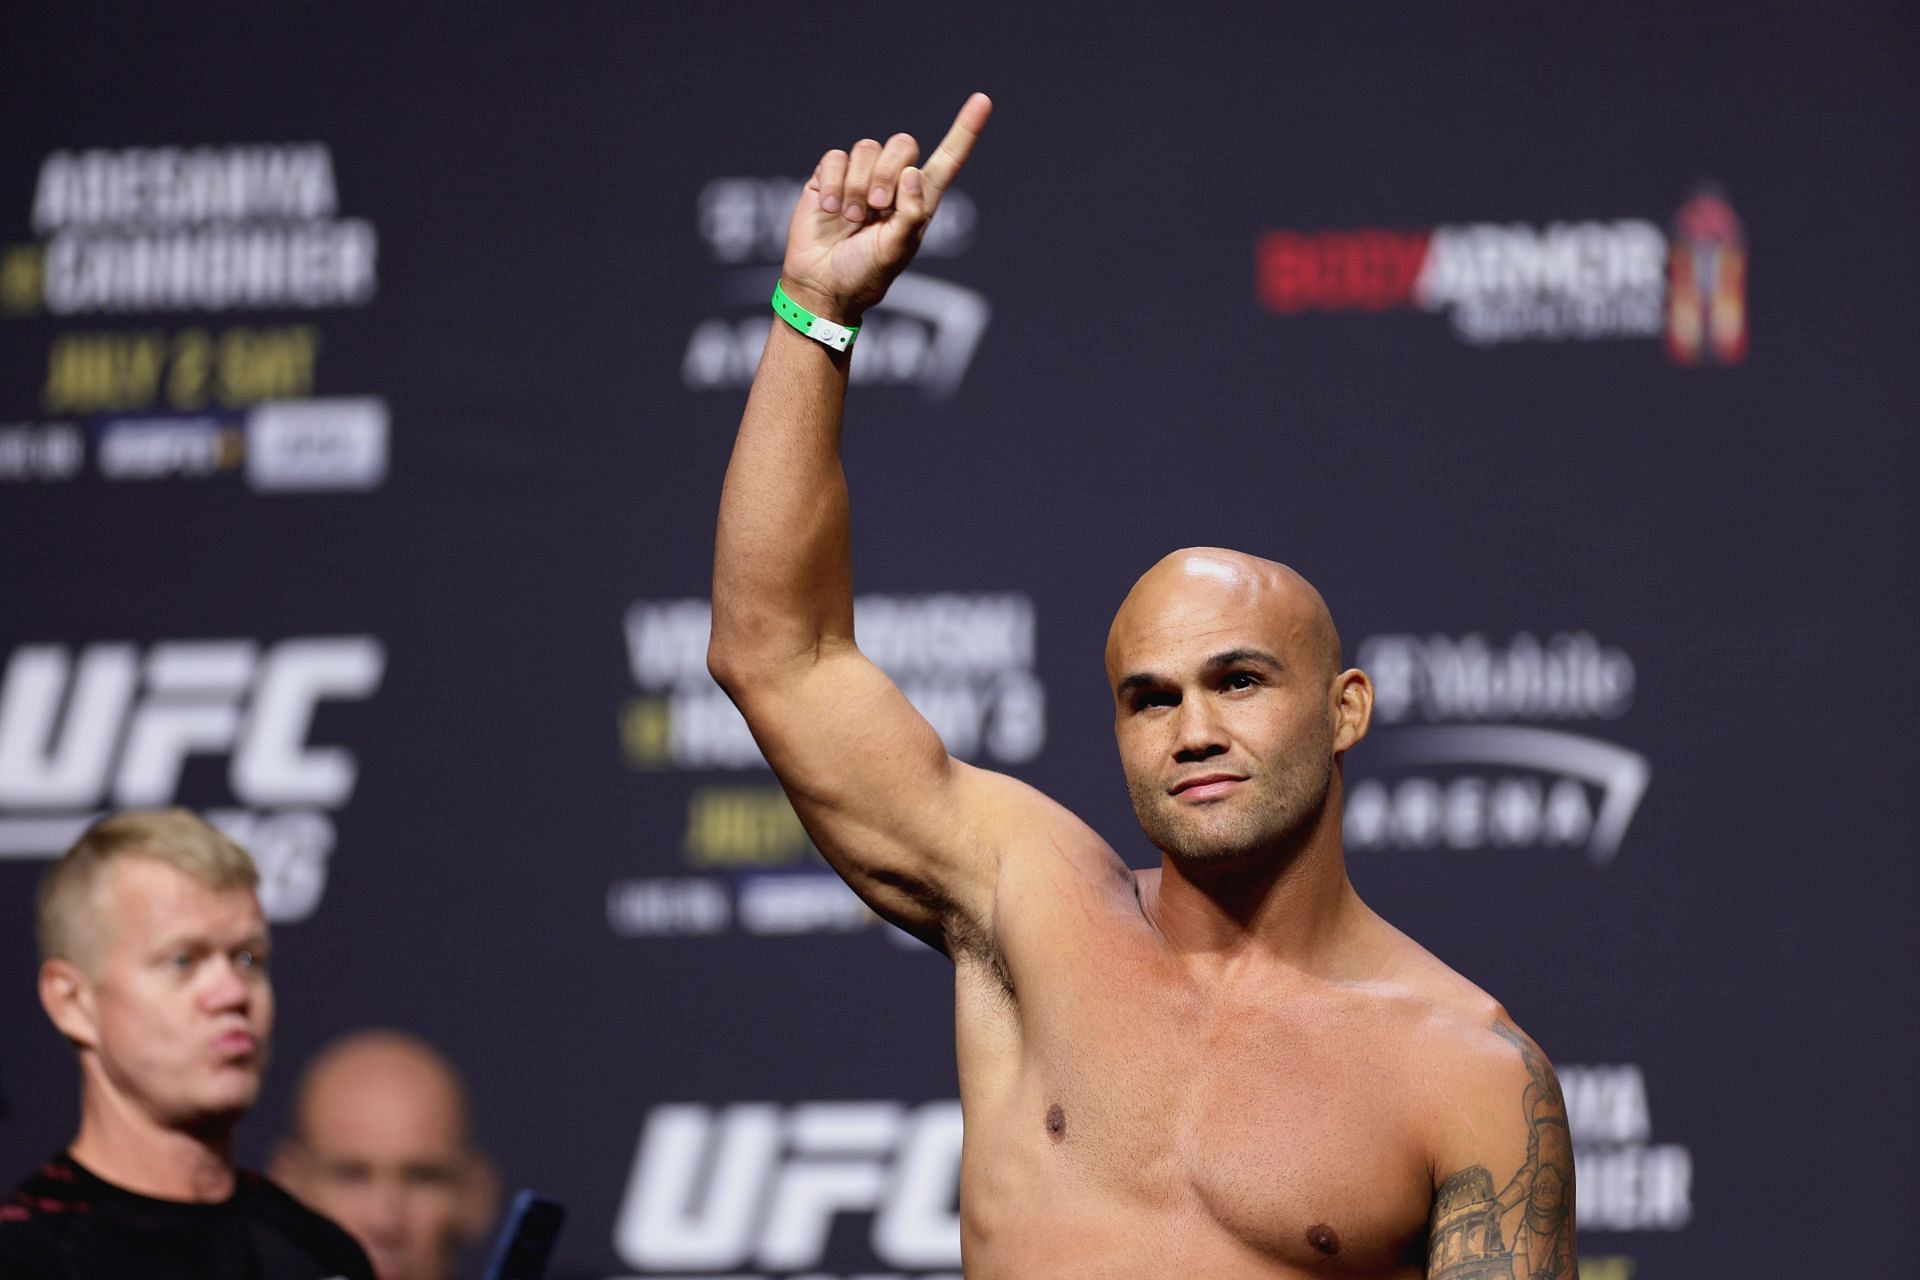 Robbie Lawler has fallen on hard times in recent years